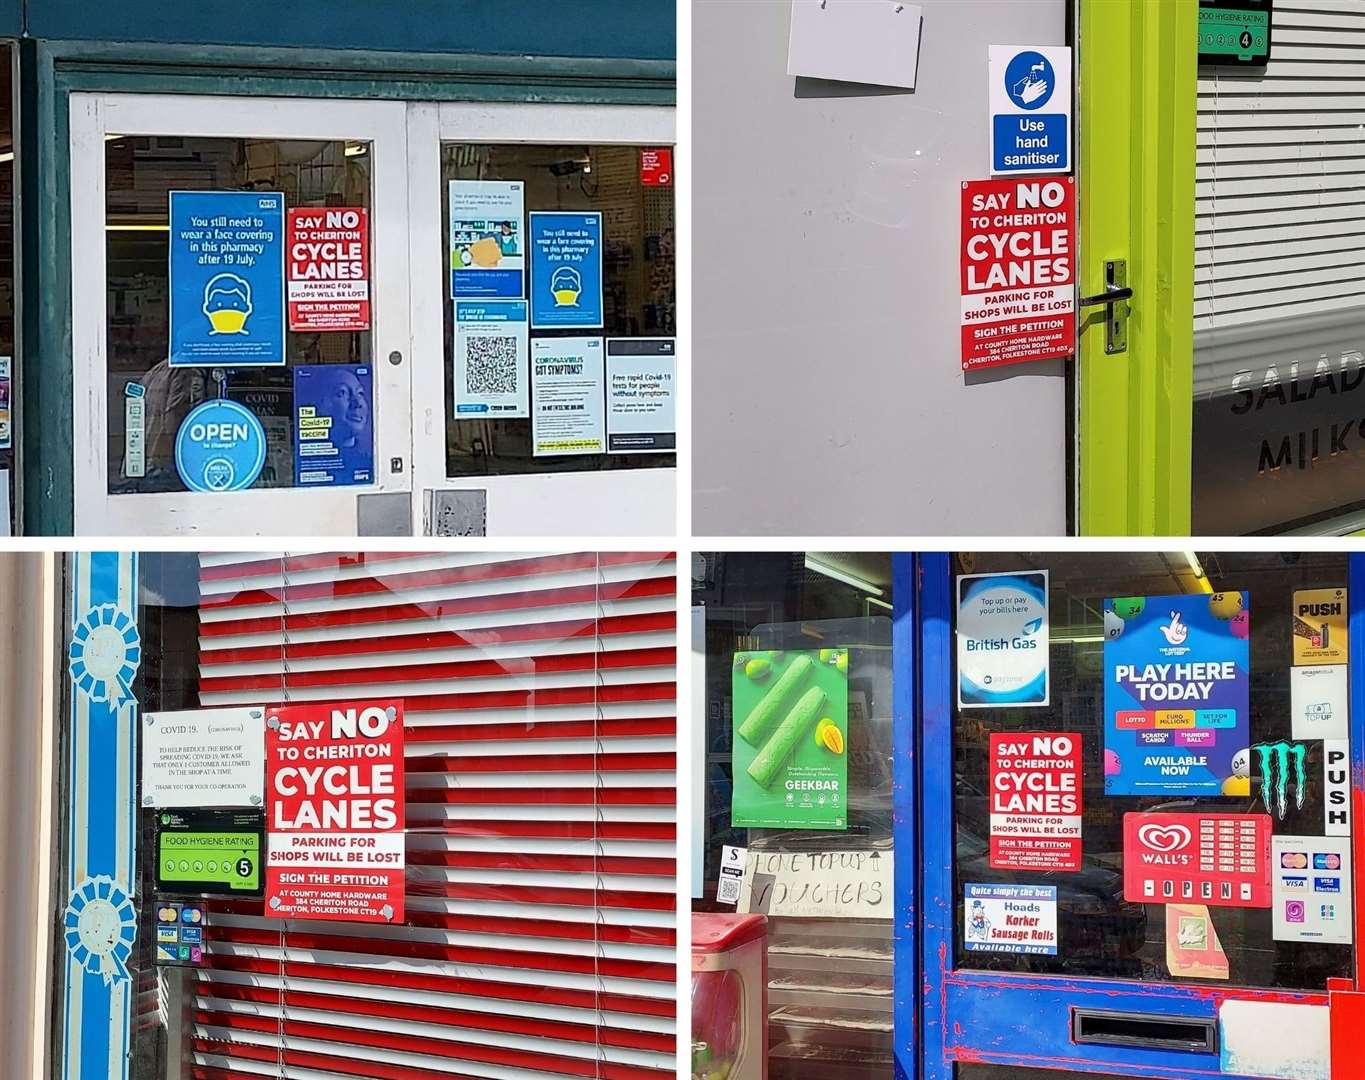 Posters opposing cycle lanes in Cheriton have appeared in shop windows